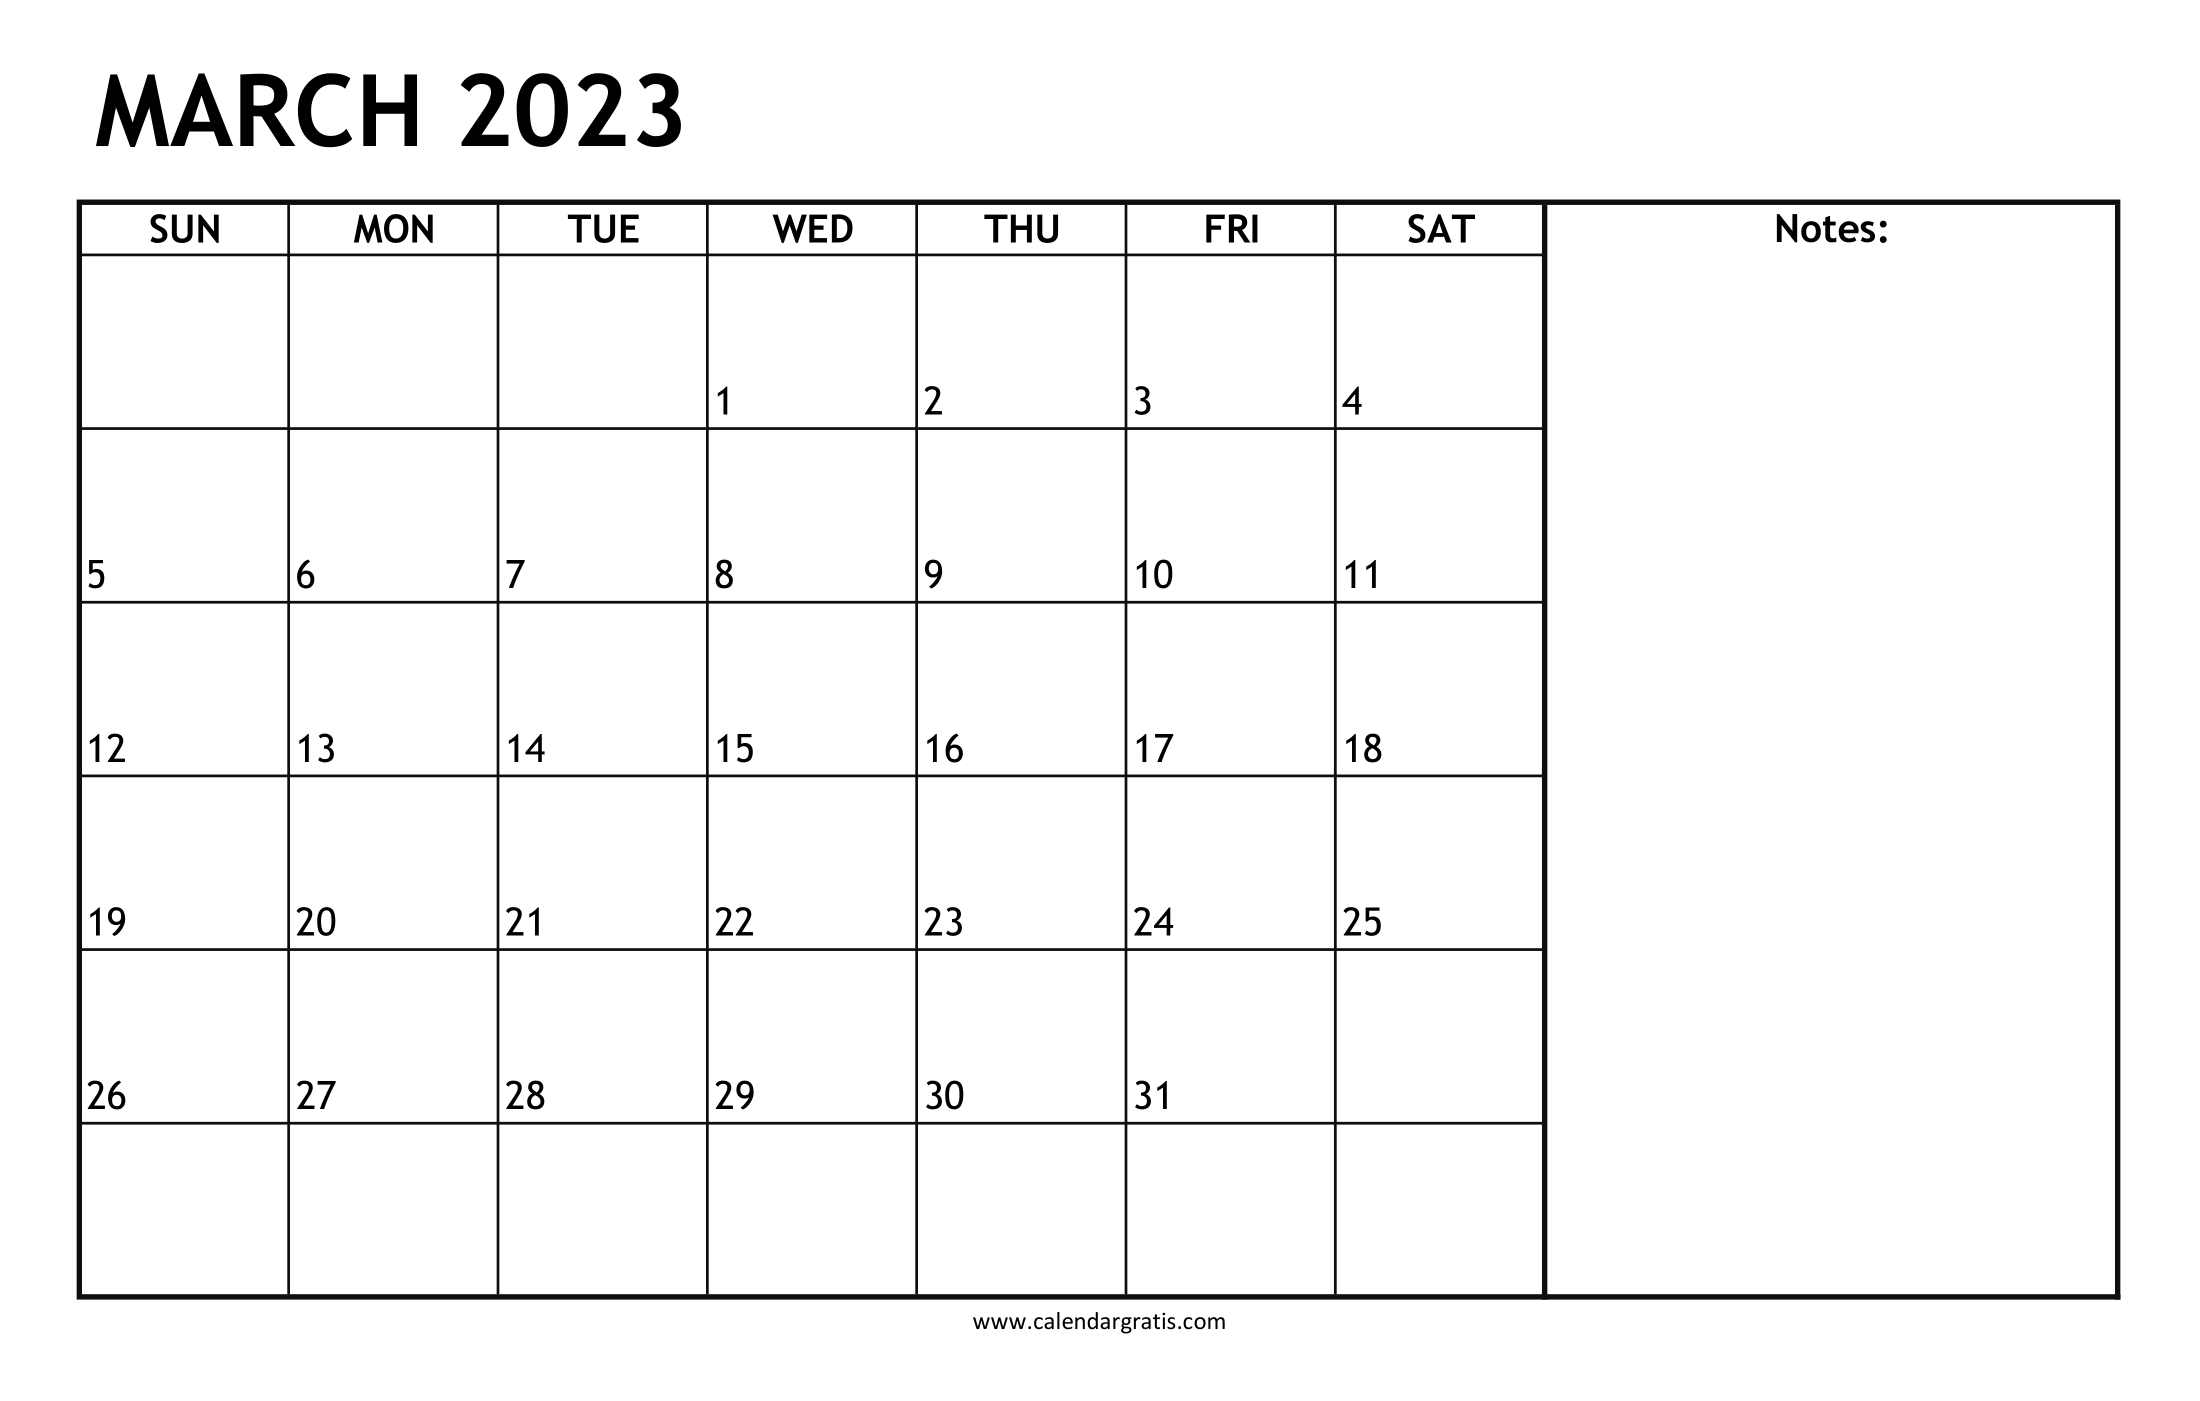 Printable March 2023 Calendar Template with Notes Section. Mark Dates for upcoming festivals, monthly appointments, meetings, birthdays, and anniversaries.